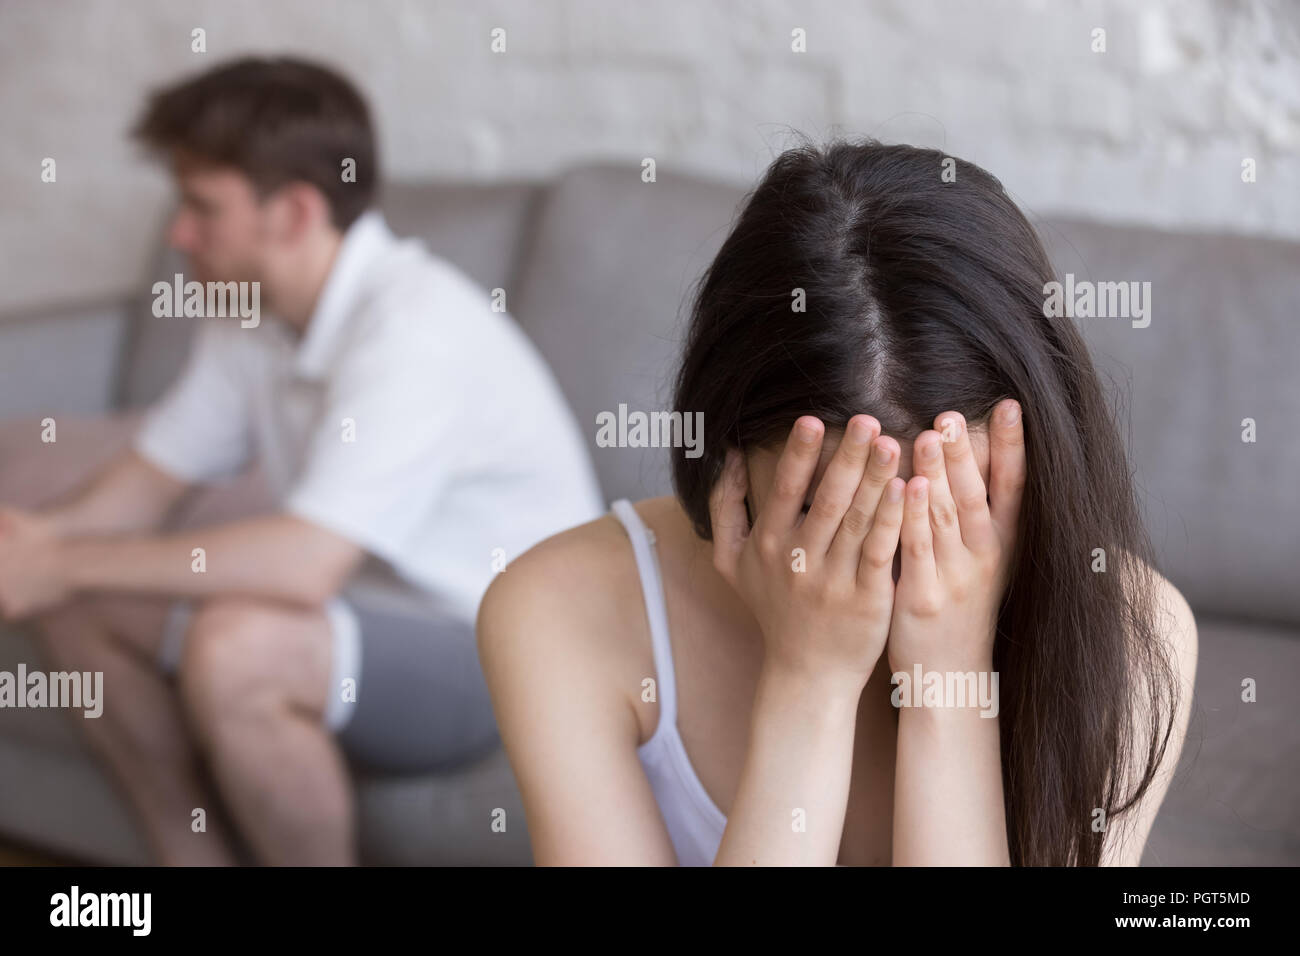 Sad girlfriend worried about relationship problems with lover Stock Photo